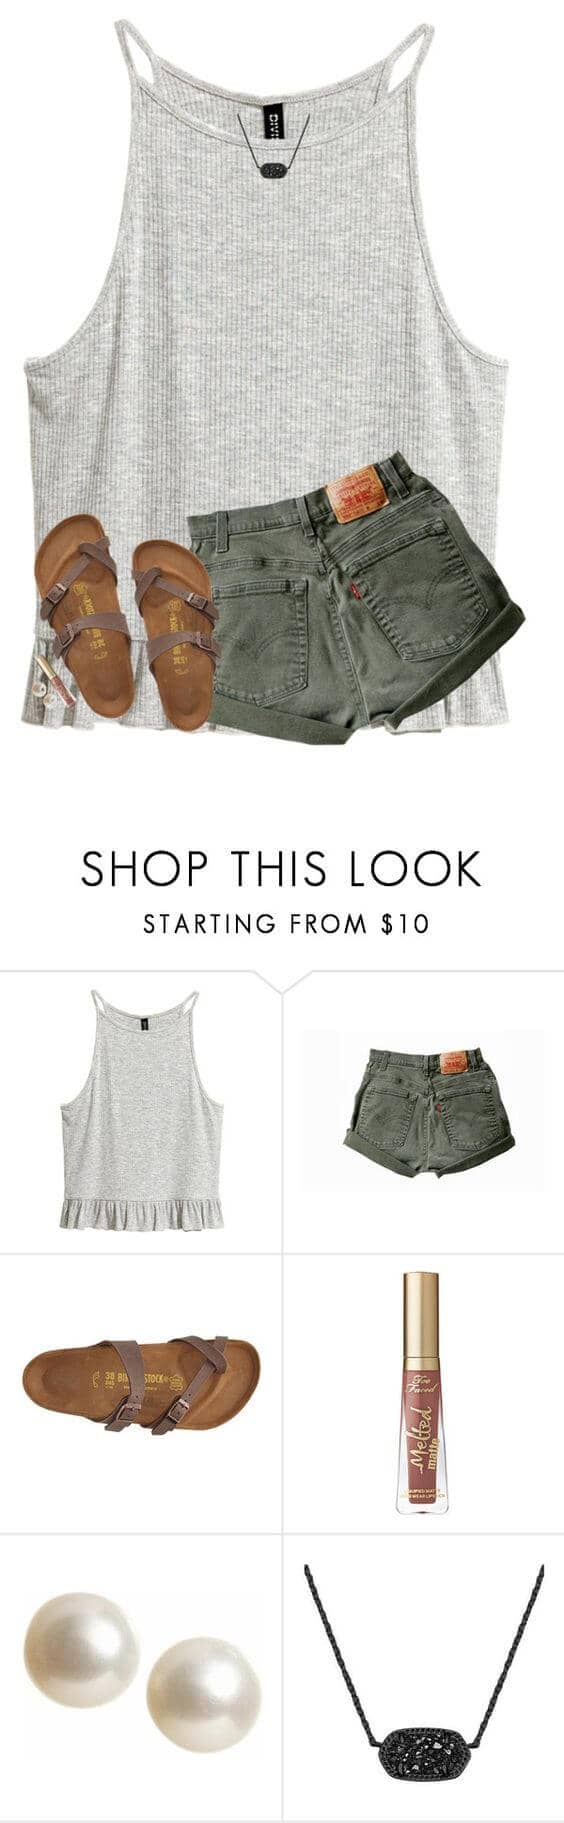 27 Cool Jeans Short Outfits For This Summer